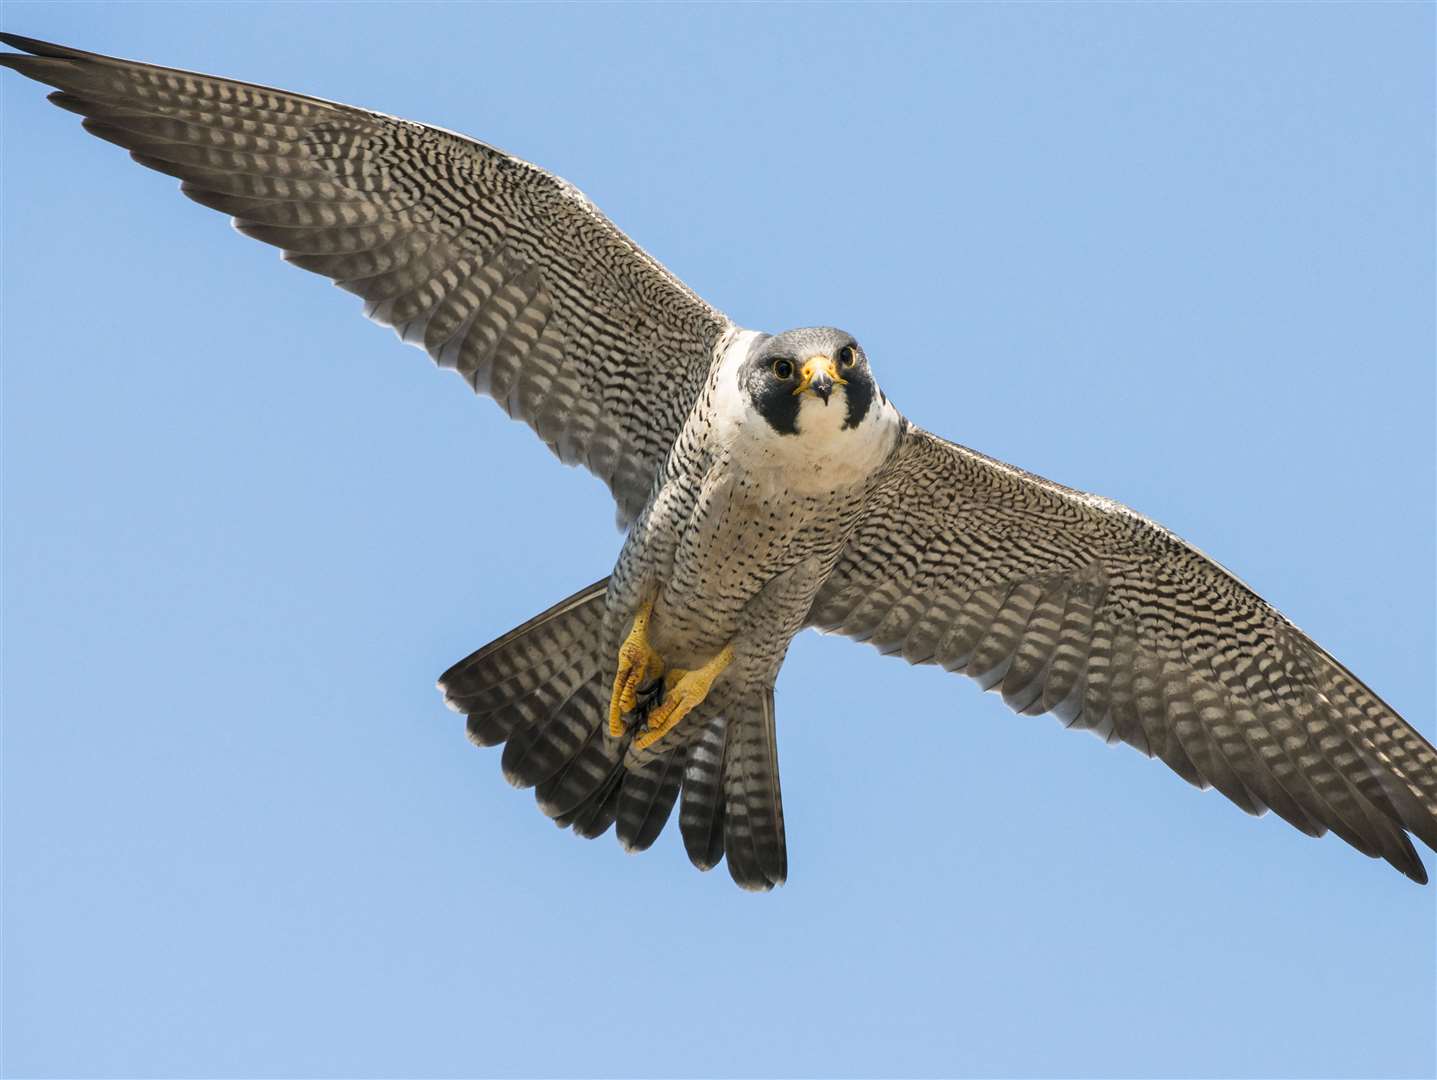 Peregrine falcons have been known to nest in the cliffs at Bluewater